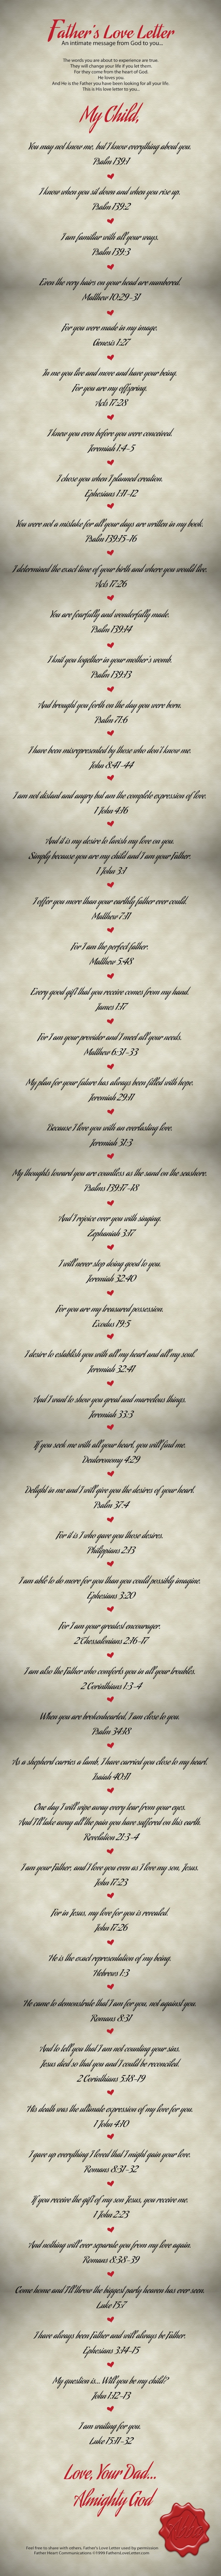 Fathers-Love-Letter-Scrolling-Parchment